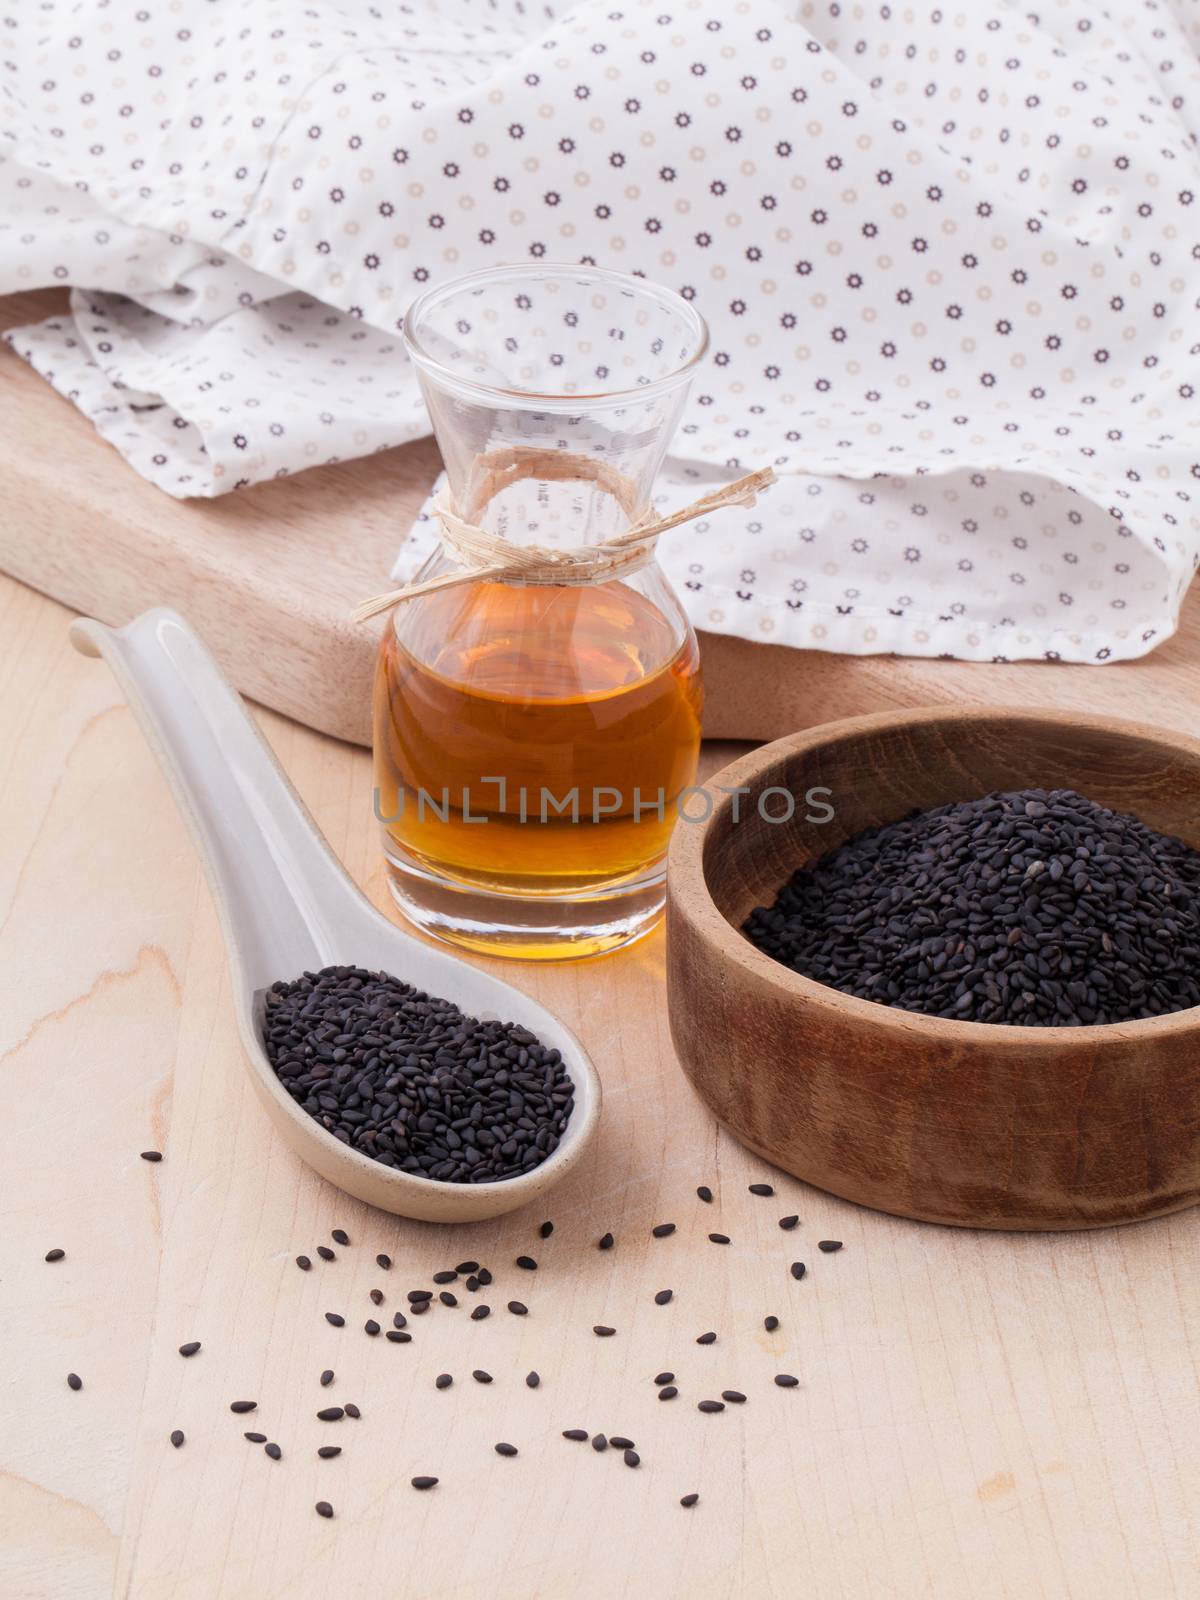 Black sesame oil and sesame seeds set up on wooden table by kerdkanno